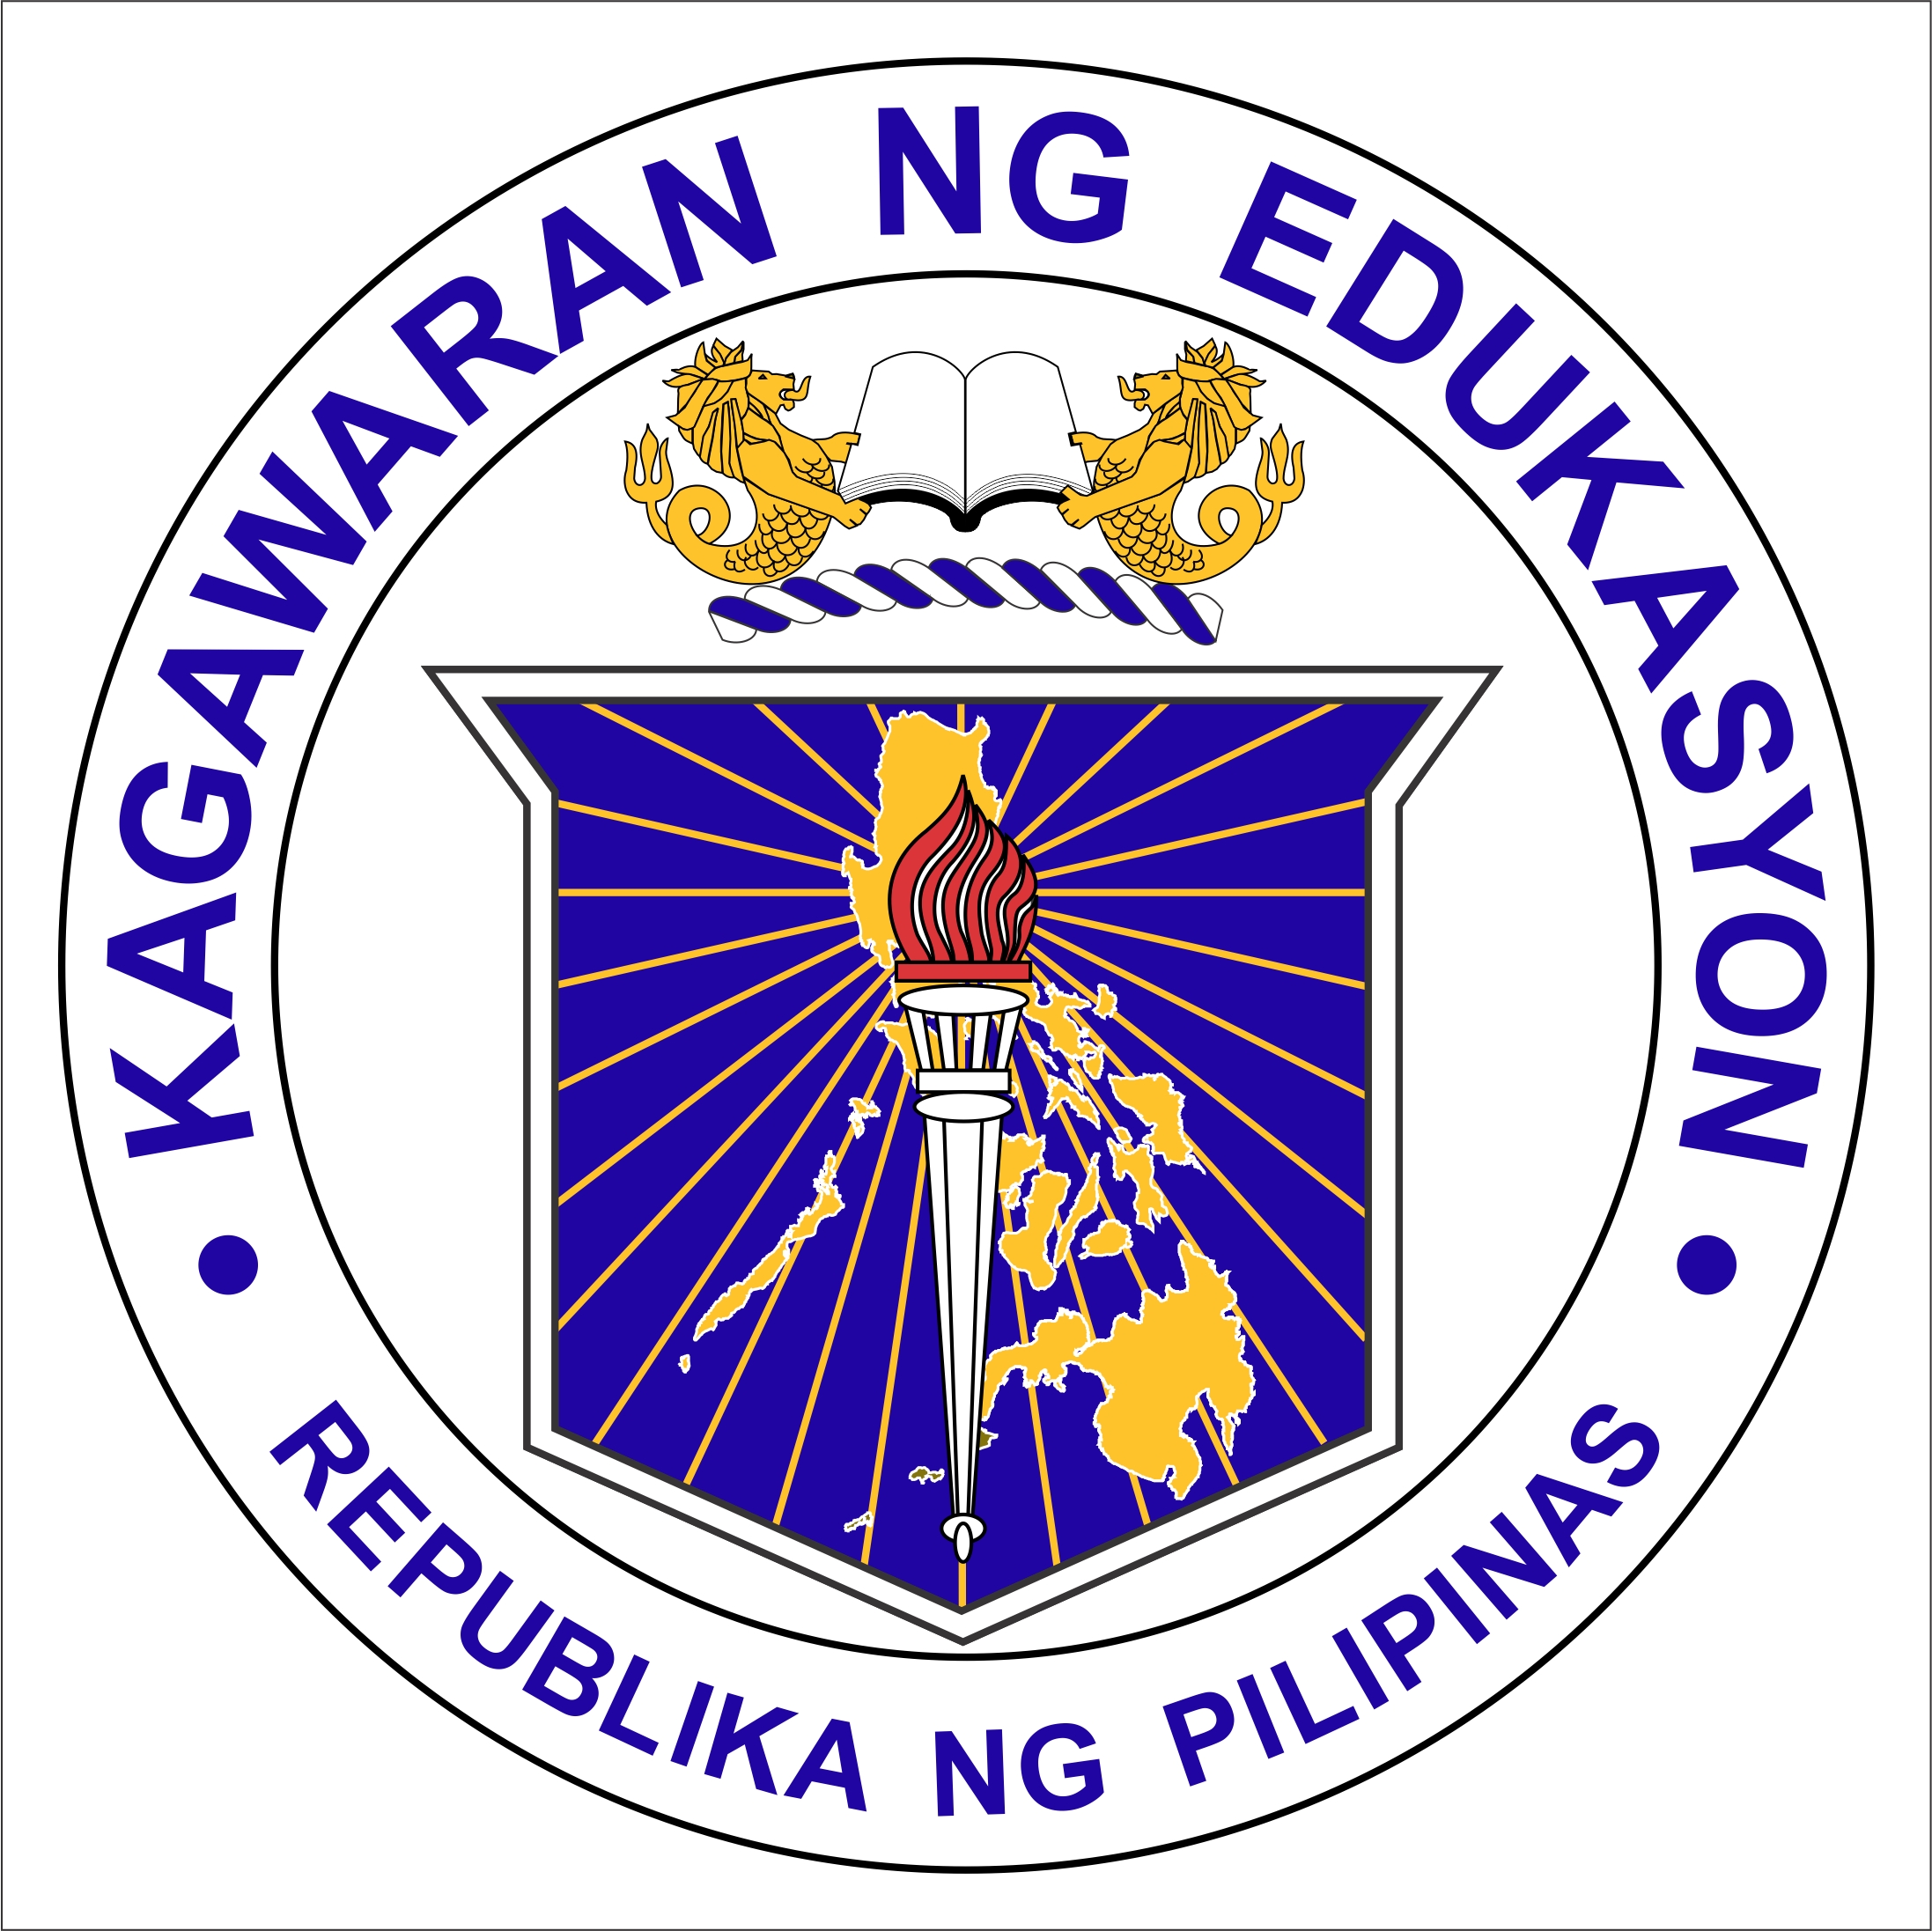 Download this Deped Official Seal Logo picture